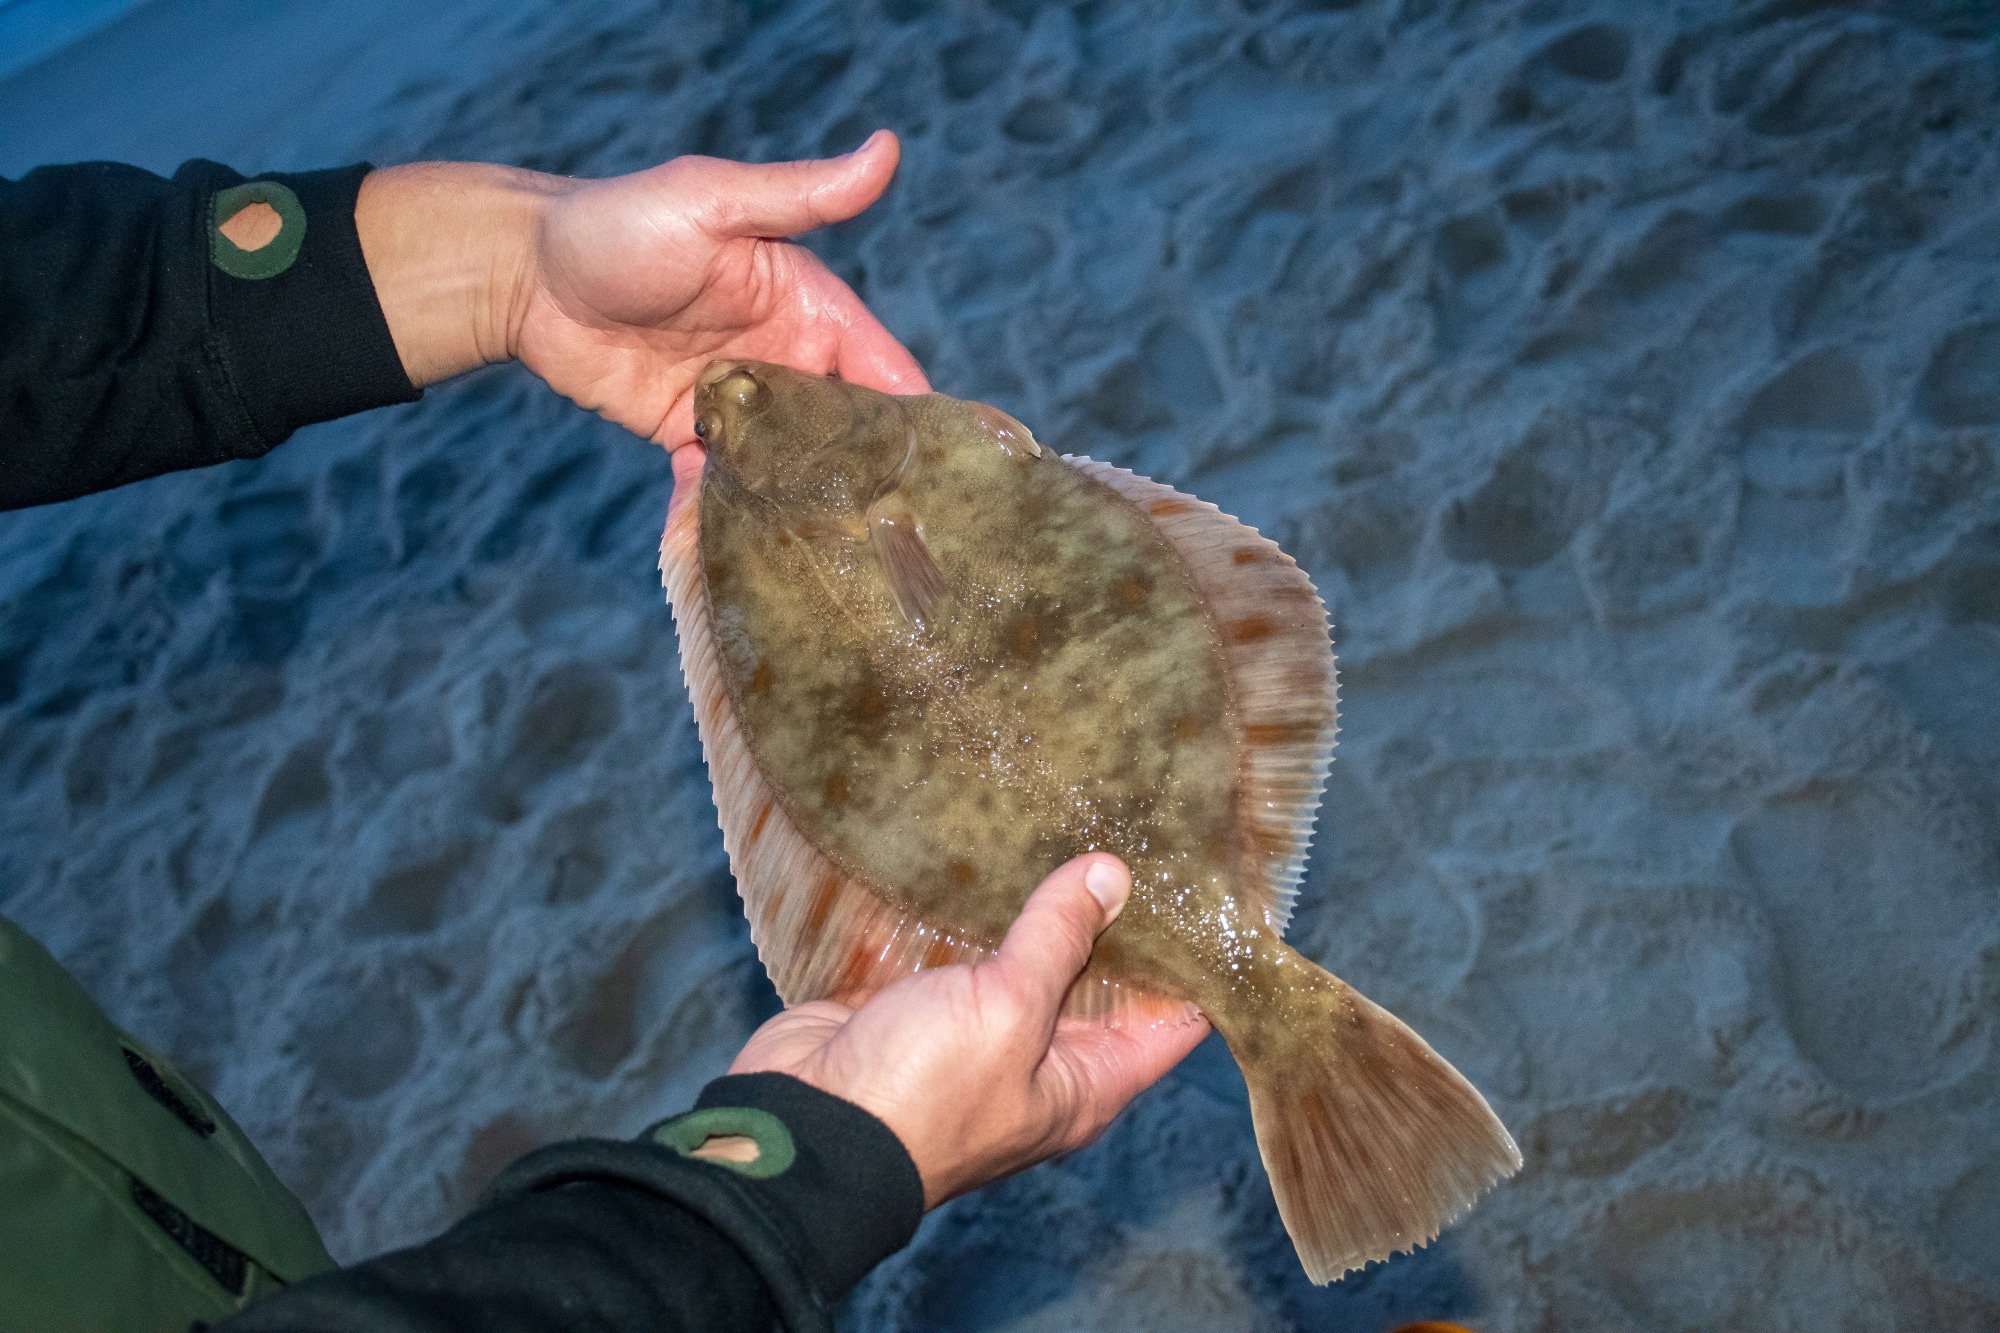 Study: Synergy between Winter Flounder antimicrobial peptides. Image Credit: MicheleUrsi/Shutterstock.com